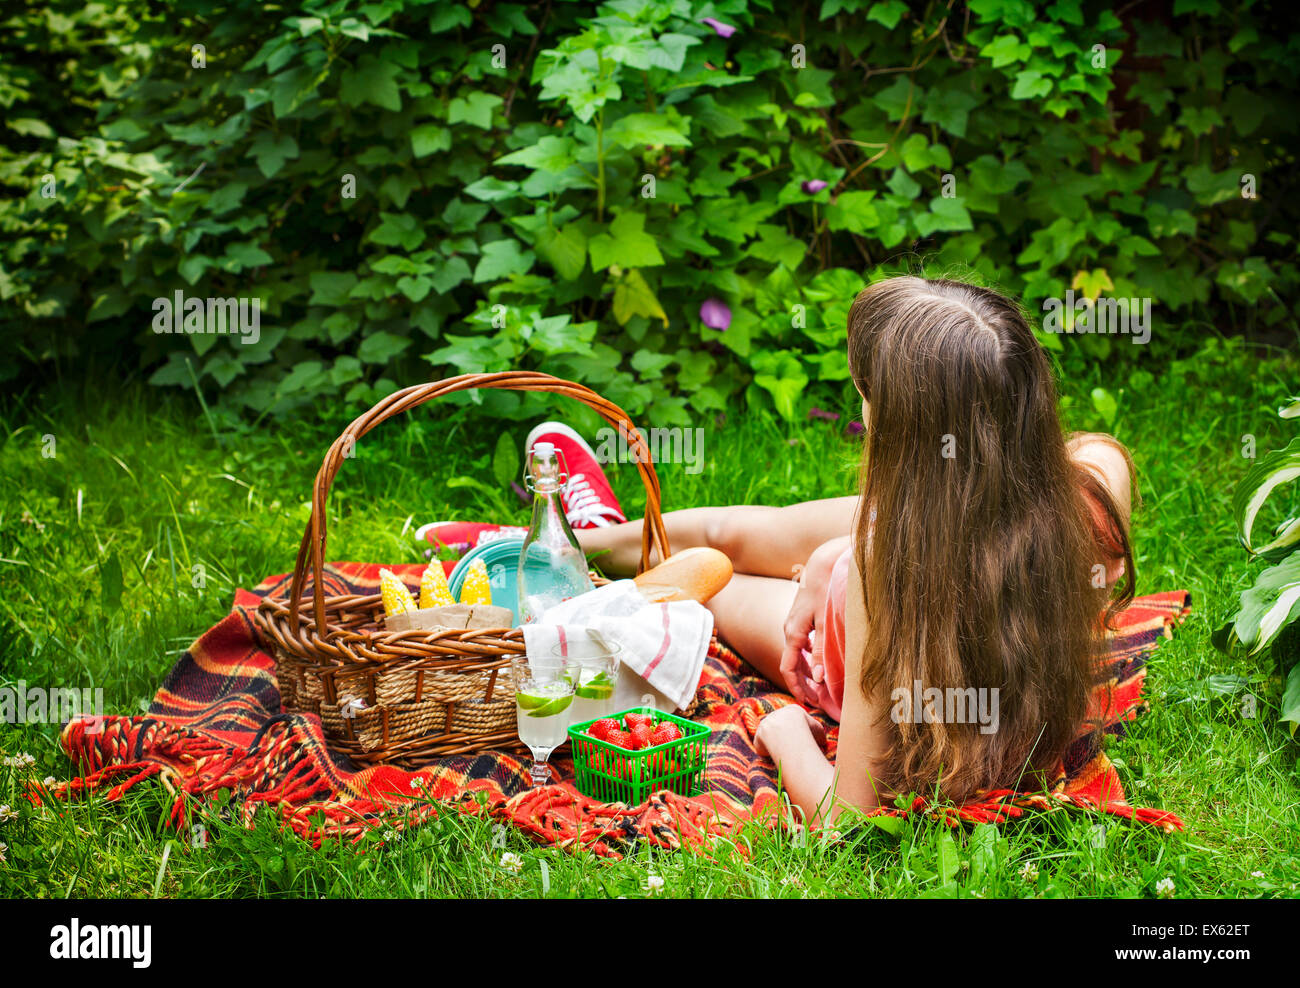 Young girl on a picnic with a basket of food Stock Photo